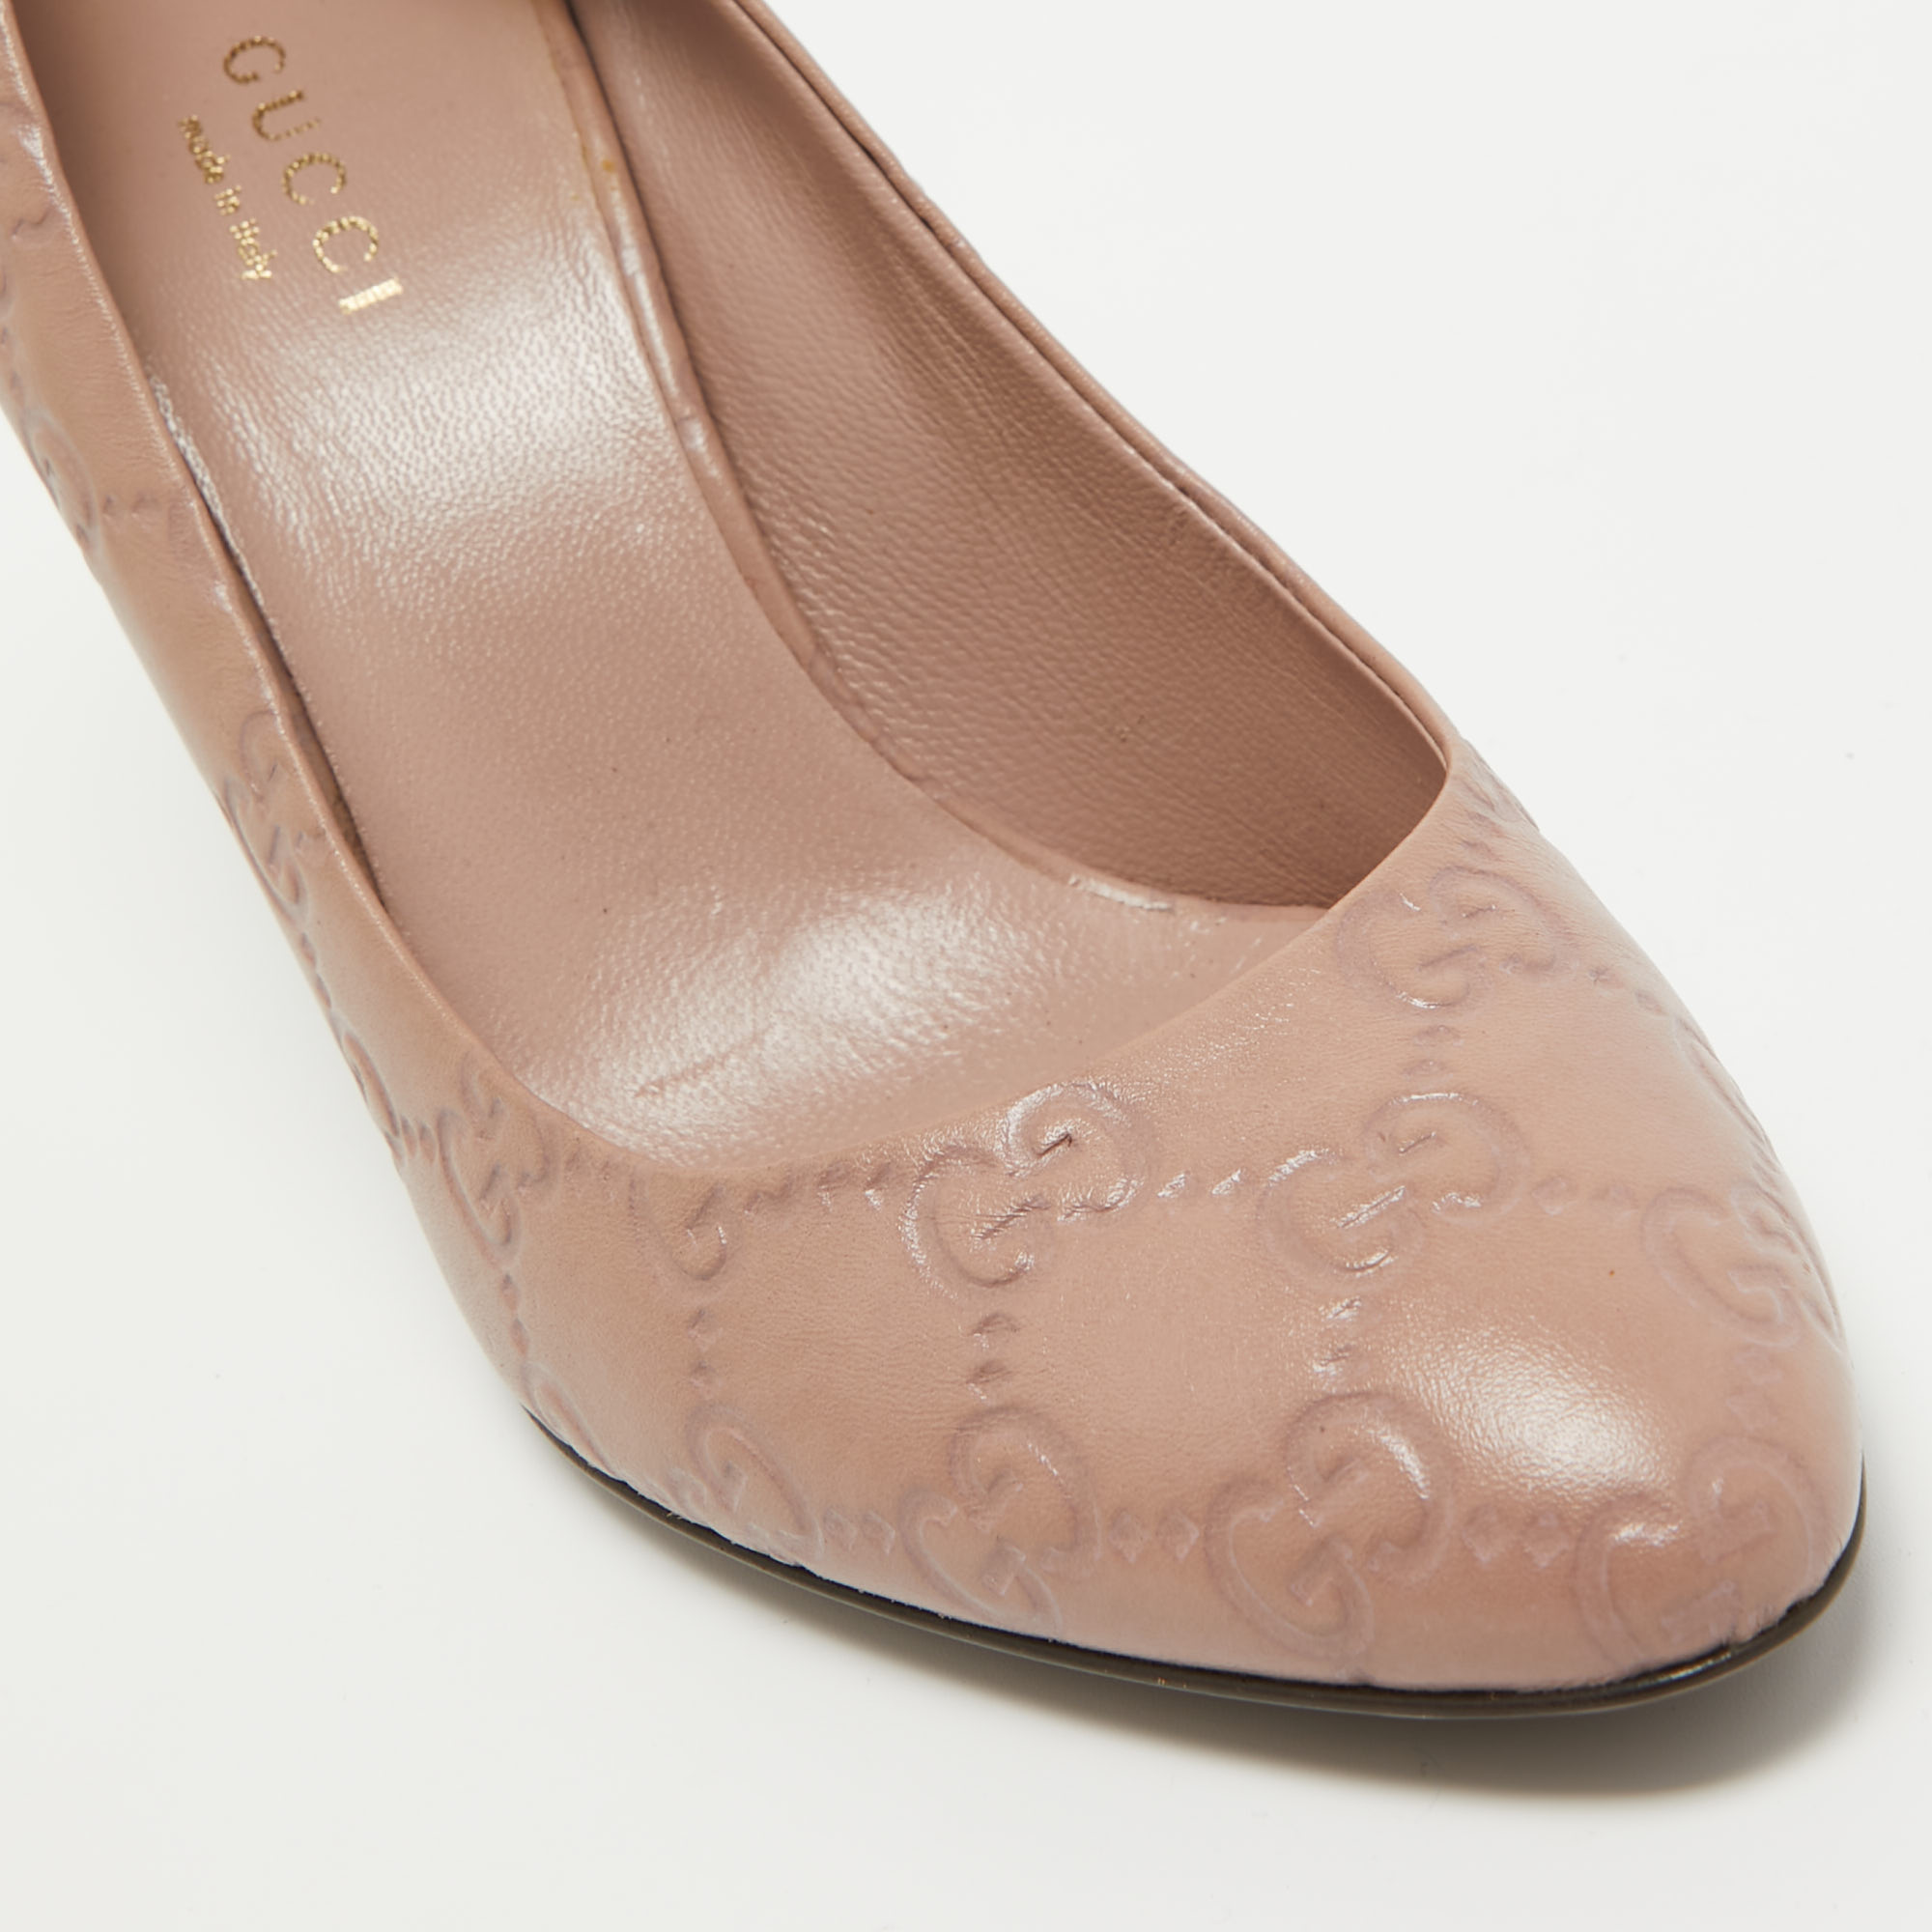 Gucci Pink Leather Guccissima Pumps Size 35.5